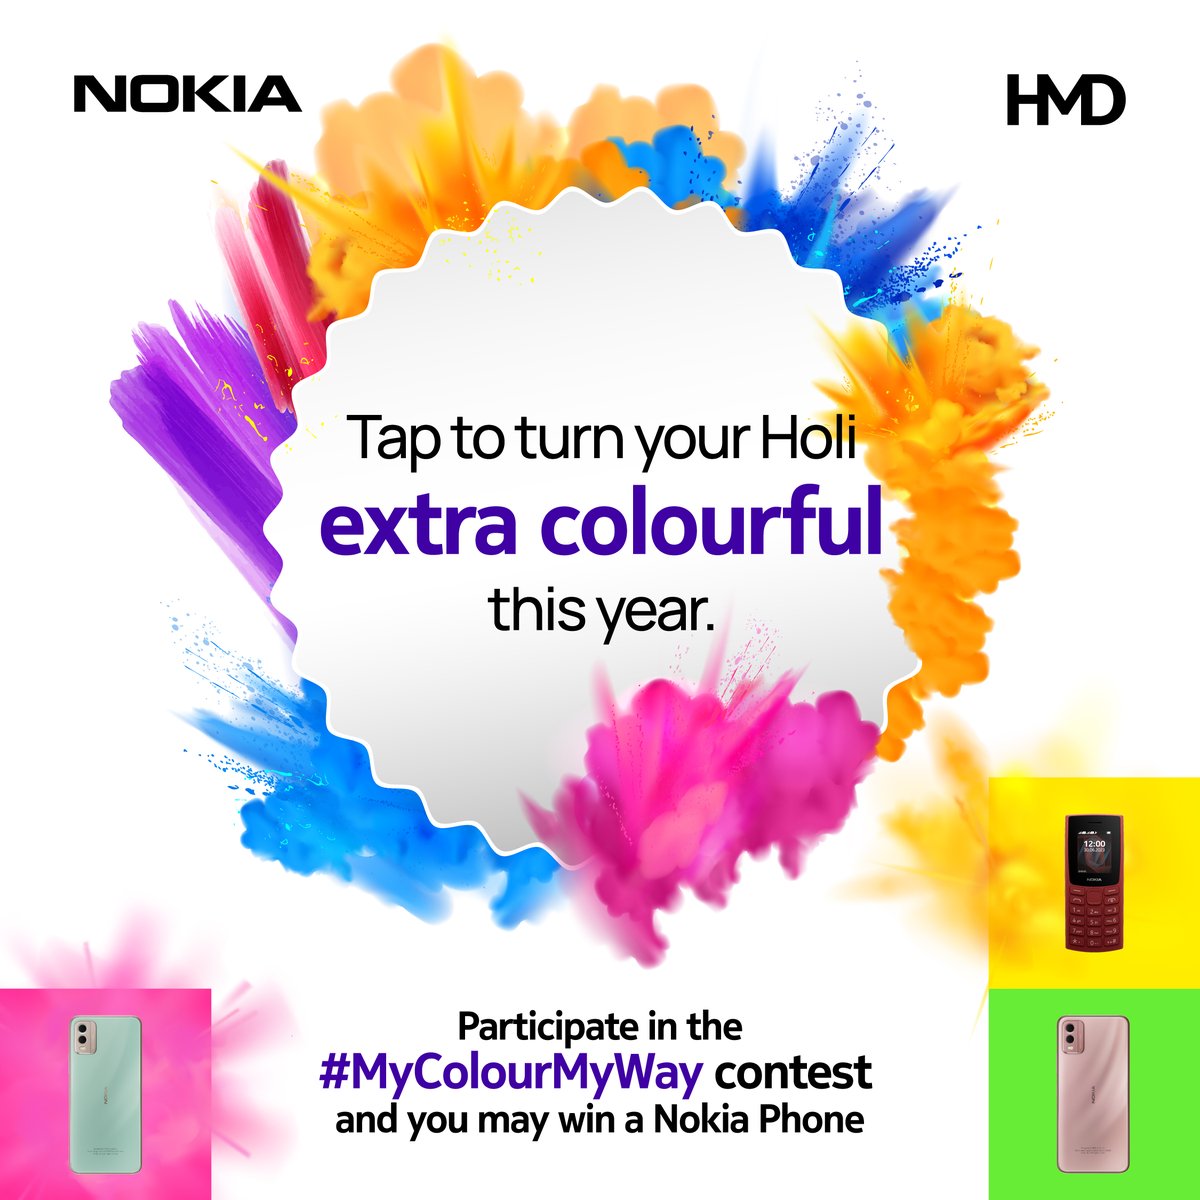 Your Holi celebrations are still missing the colour of a brand-new Nokia Phone! Participate in the #MyColourMyWay Holi Contest and stand a chance to win a brand-new Nokia Device. Check out our previous posts to know the details. #HappyHoli #HMD #HoliContest #Nokiaphones